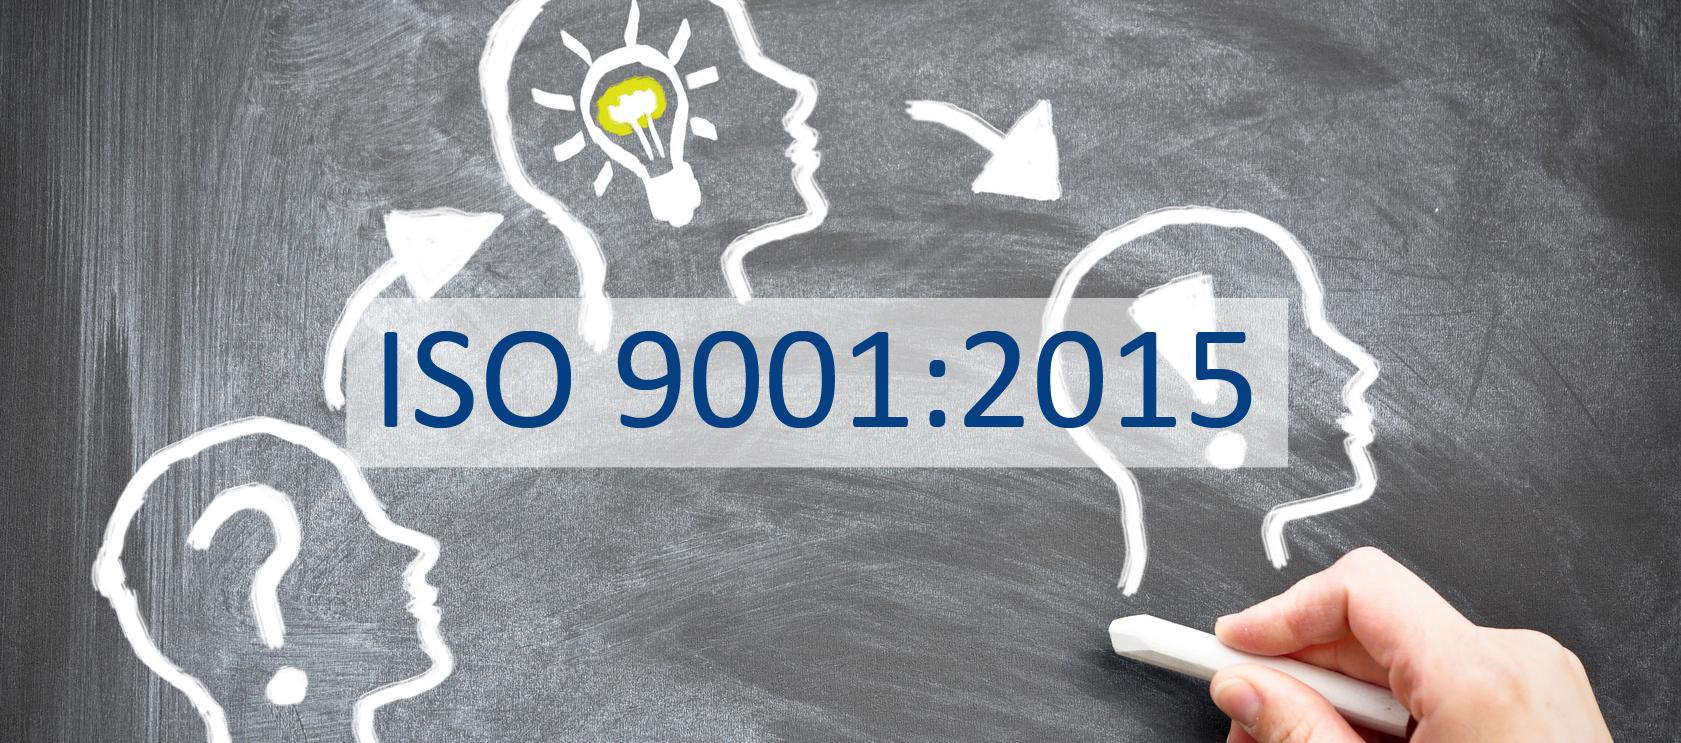 What is ISO 9001:2015, and what does it mean?